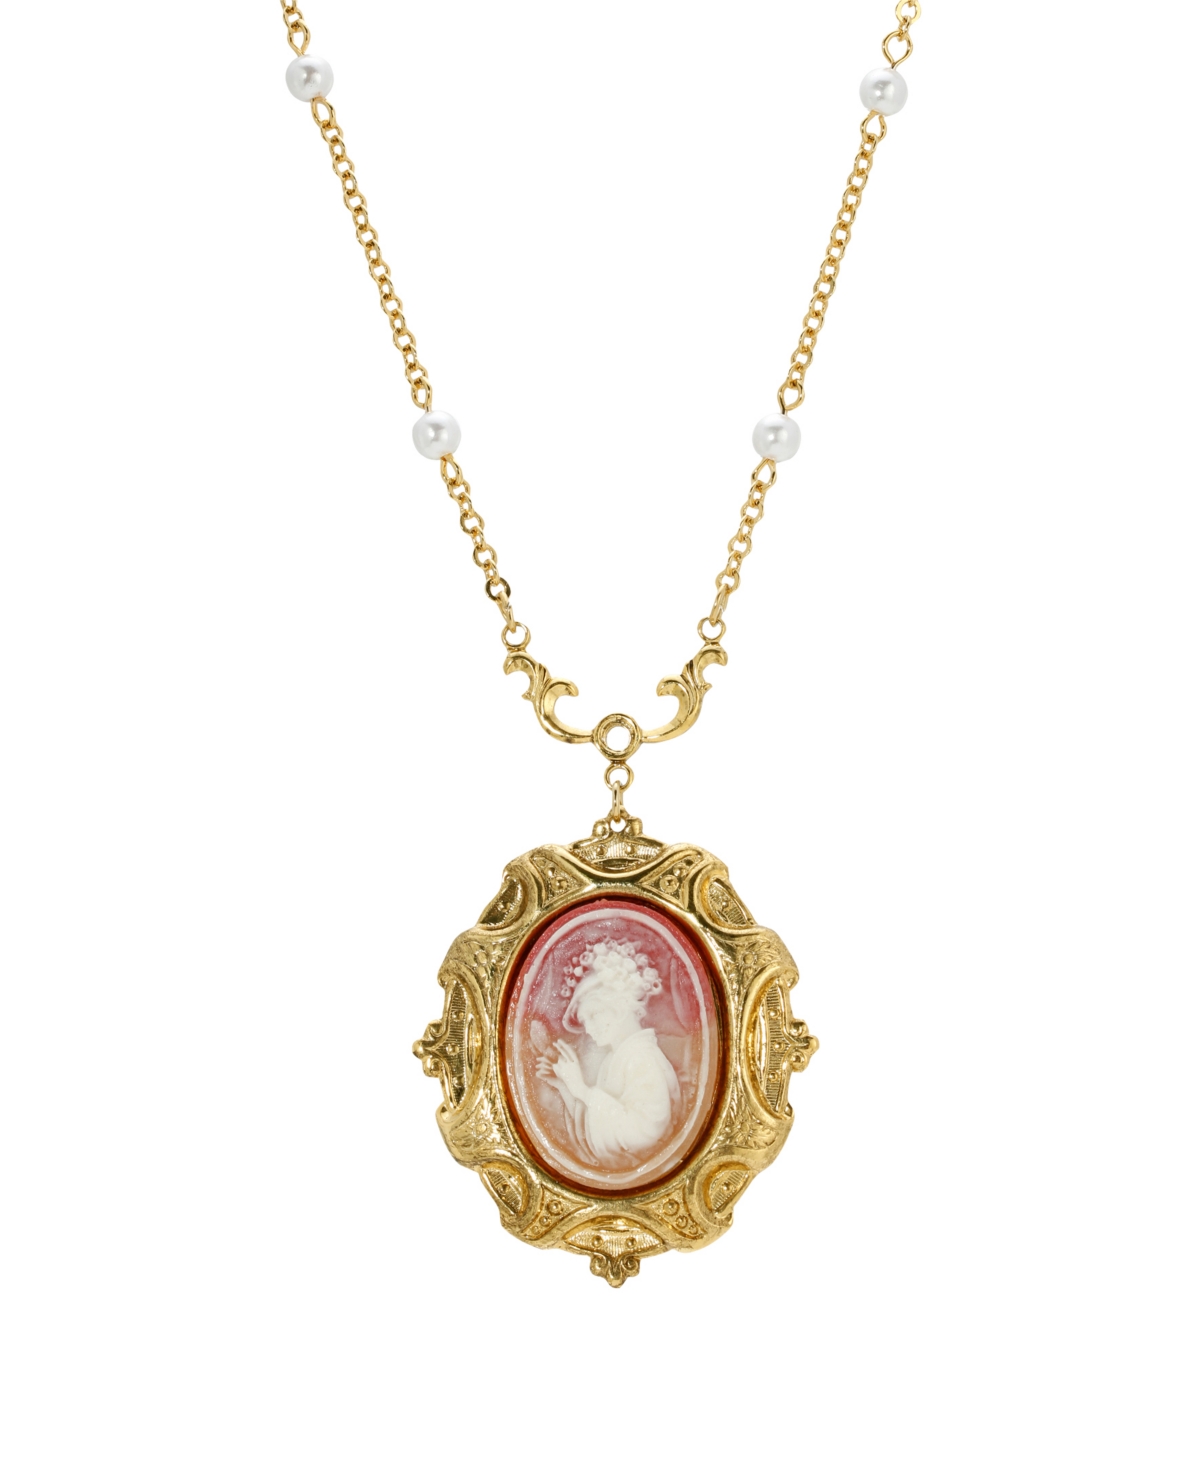 2028 14k Gold Plated Cameo Imitation Pearl Necklace In Pink